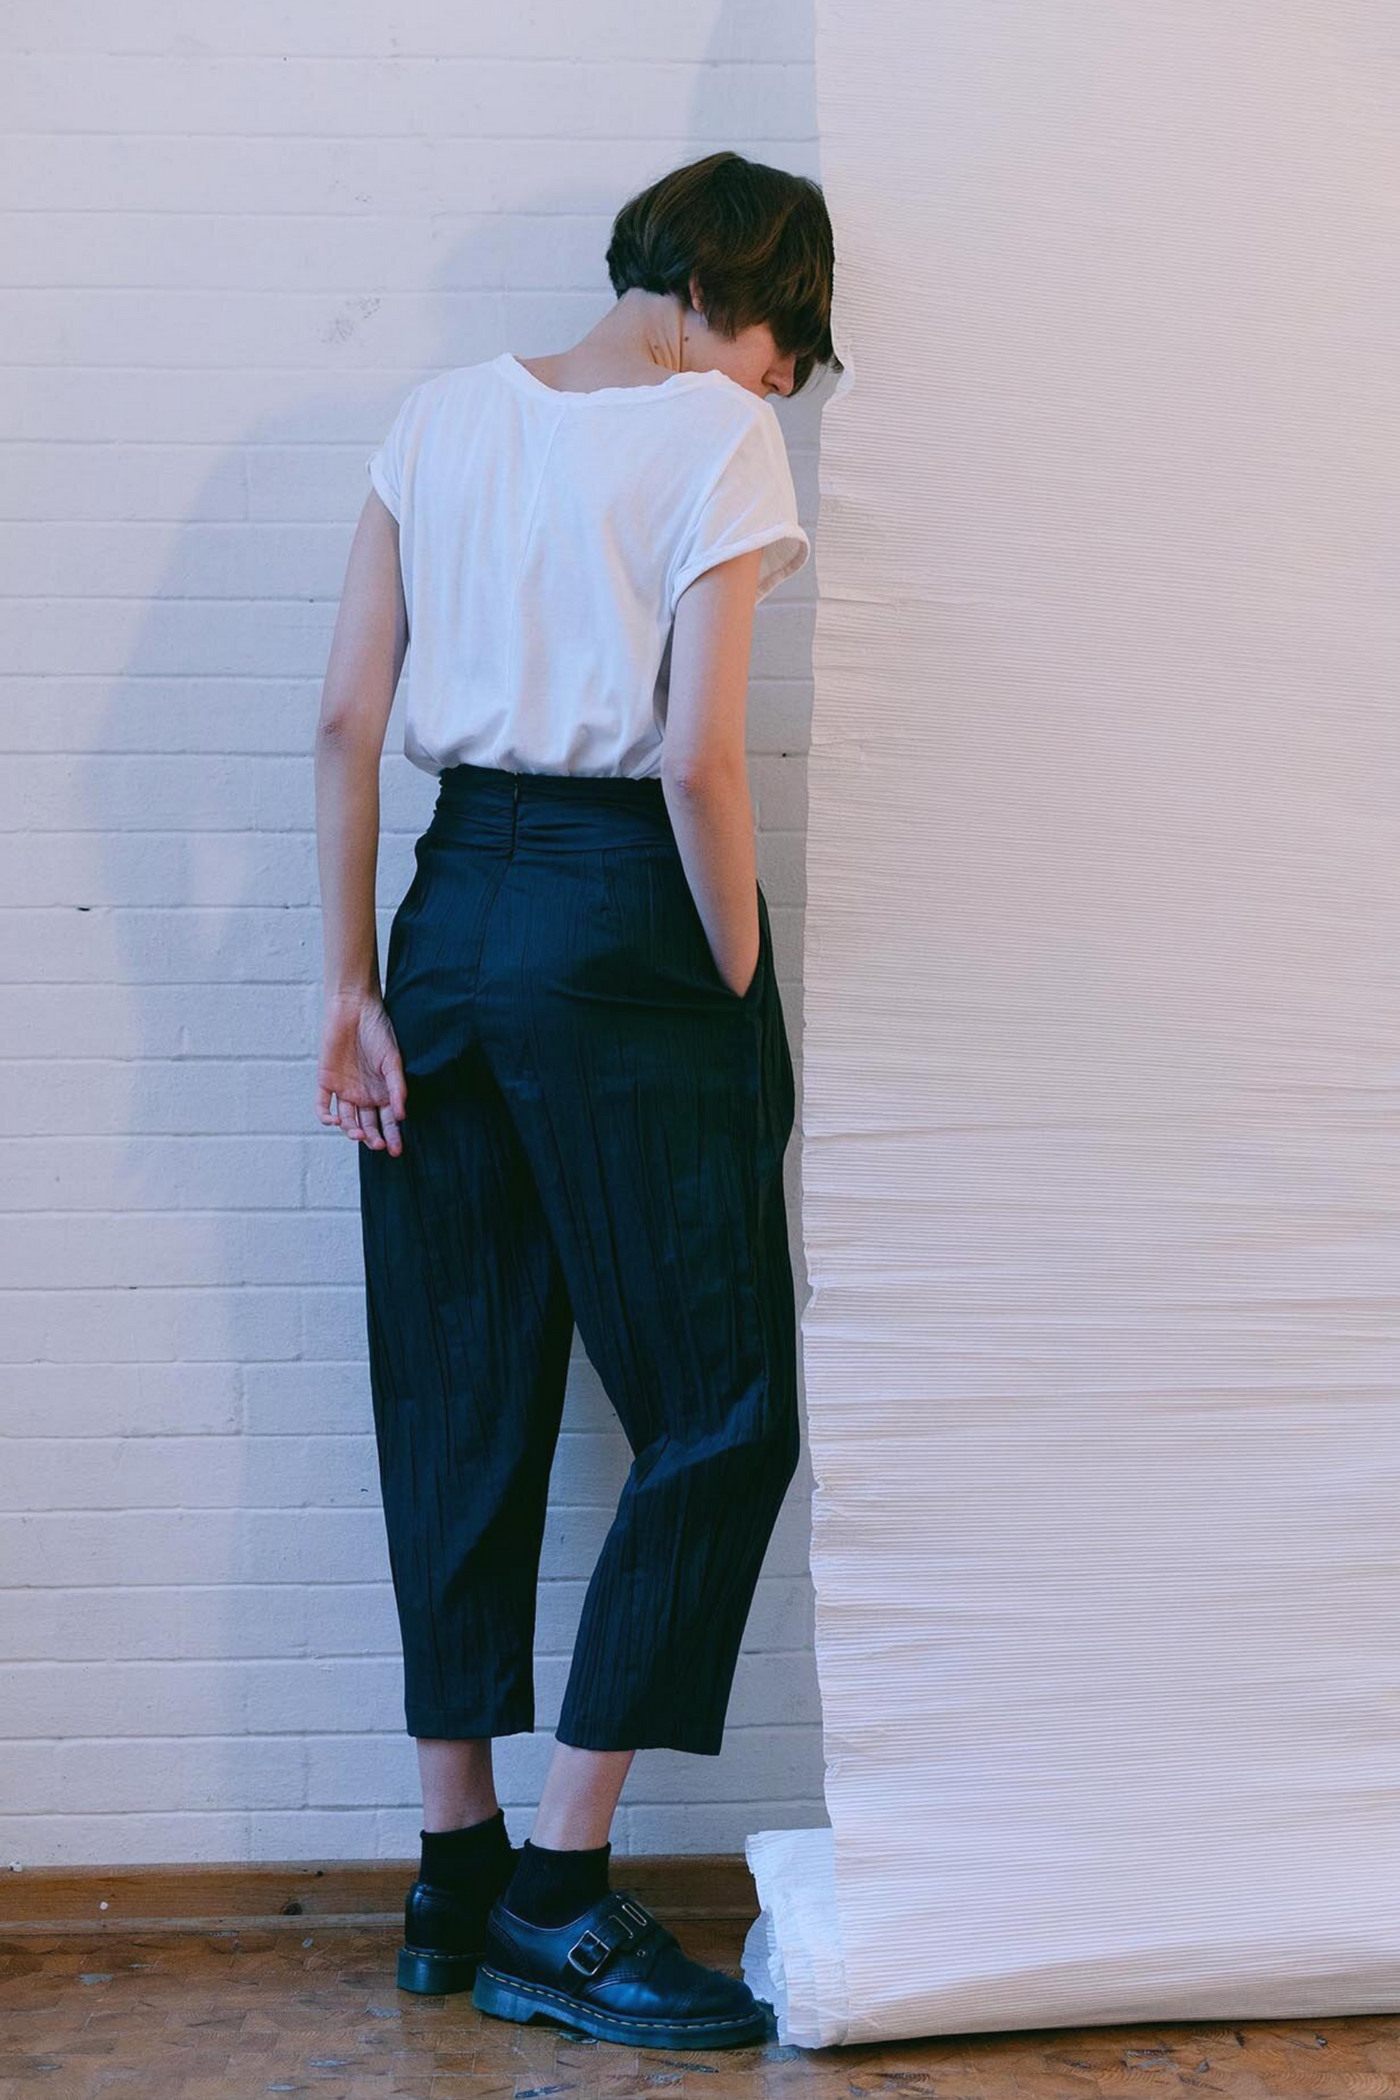 Su By Hand Ines Crinkle Pants in Charcoal Black, available on ZERRIN with free Singapore shipping